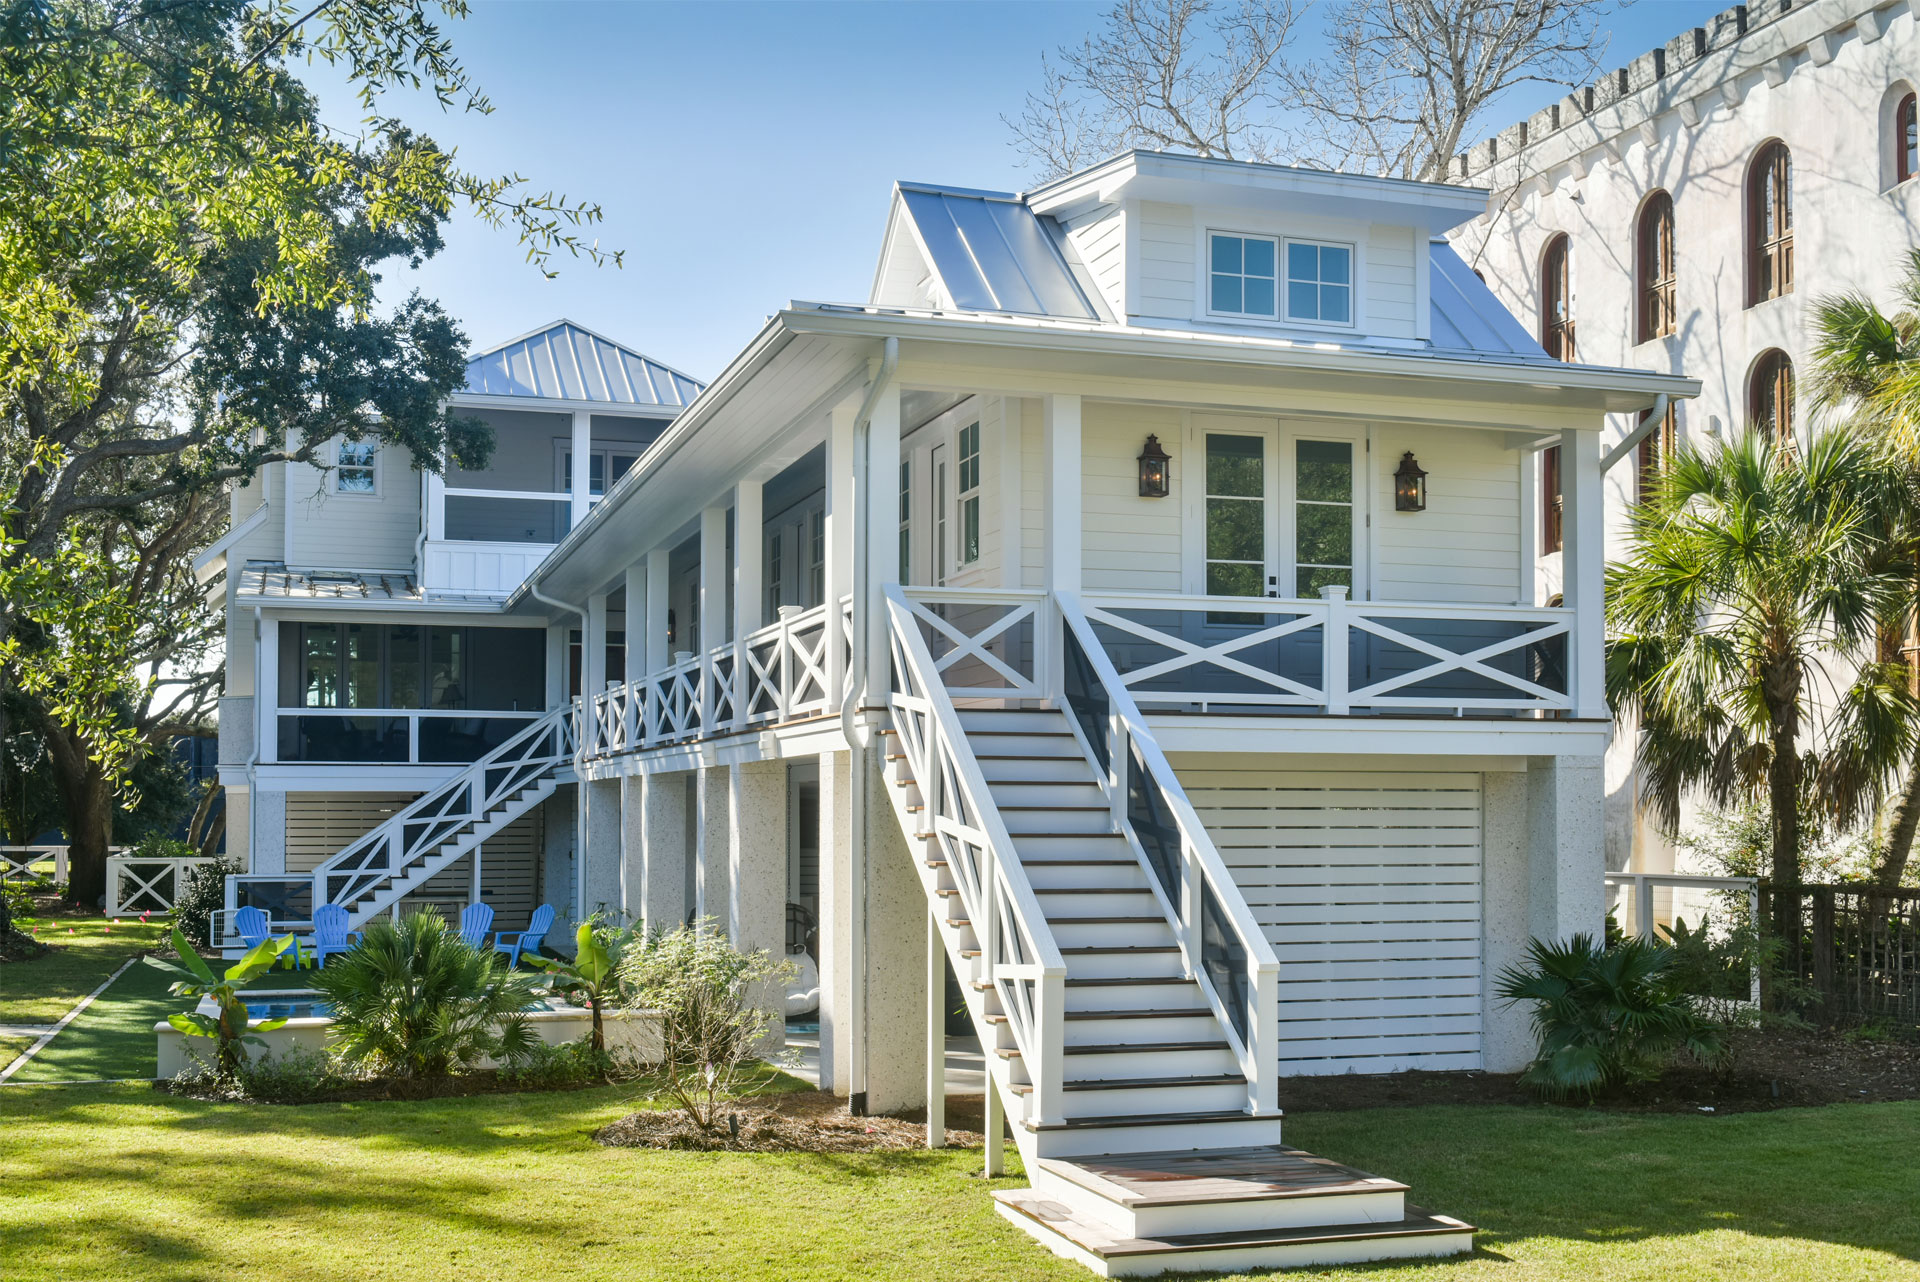 Sullivan's Island home with unique front and year yard road frontage designed by Rachel Burton of Swallowtail Architecture